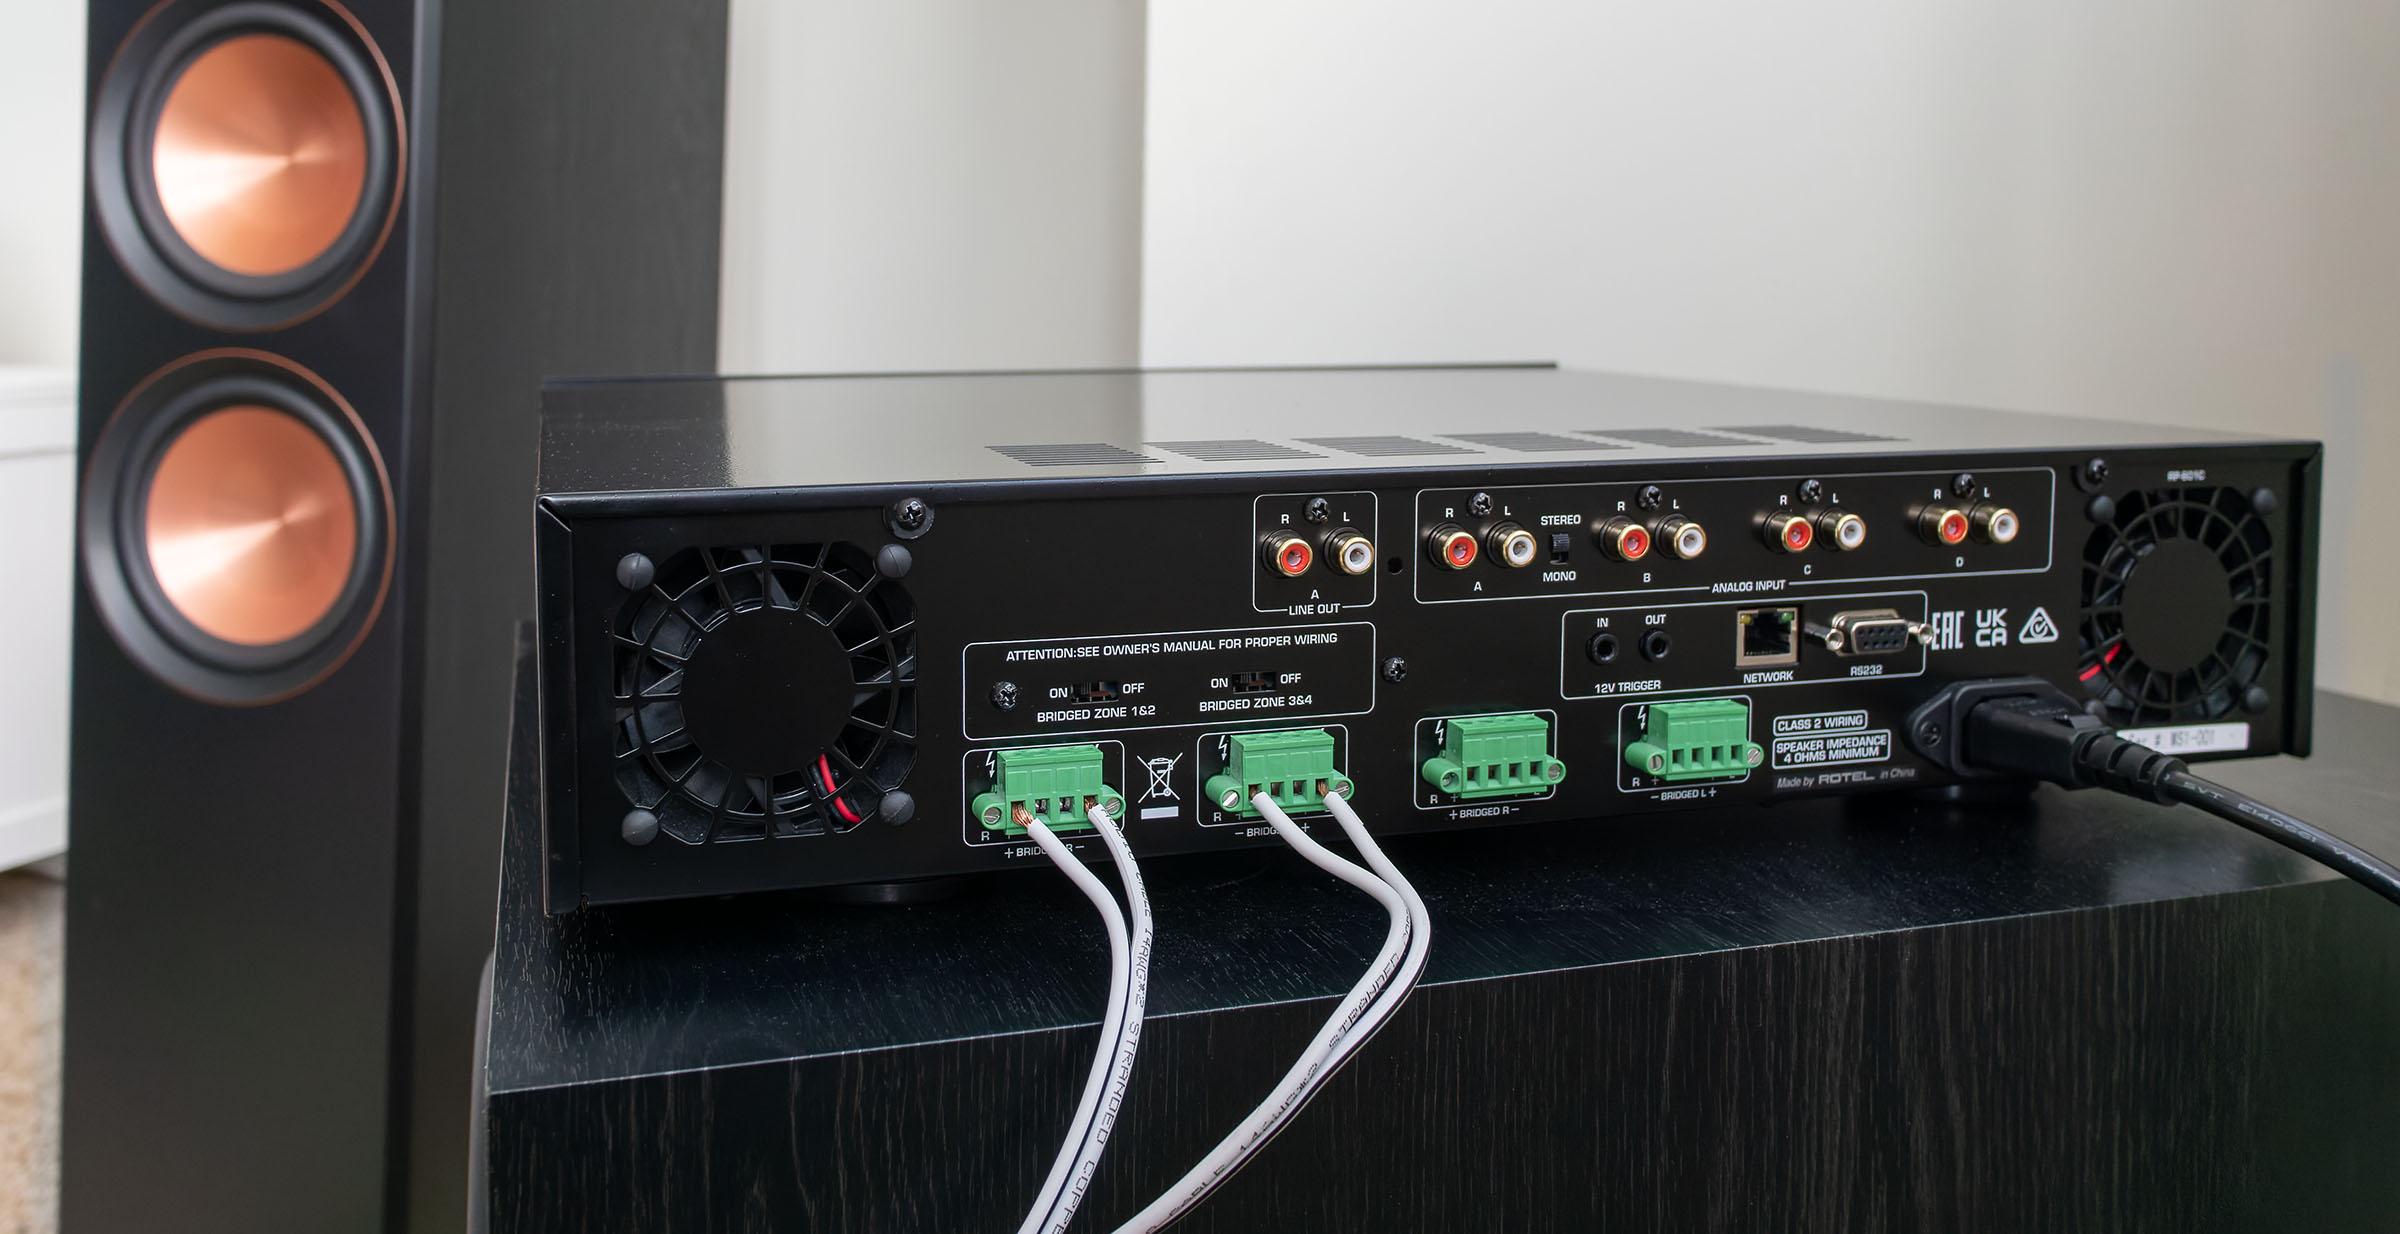 An 8-channel bridgeable class A/B amp that is both custom install-friendly and audiophile quality. f511b42f rotel c8 distribution amp rear